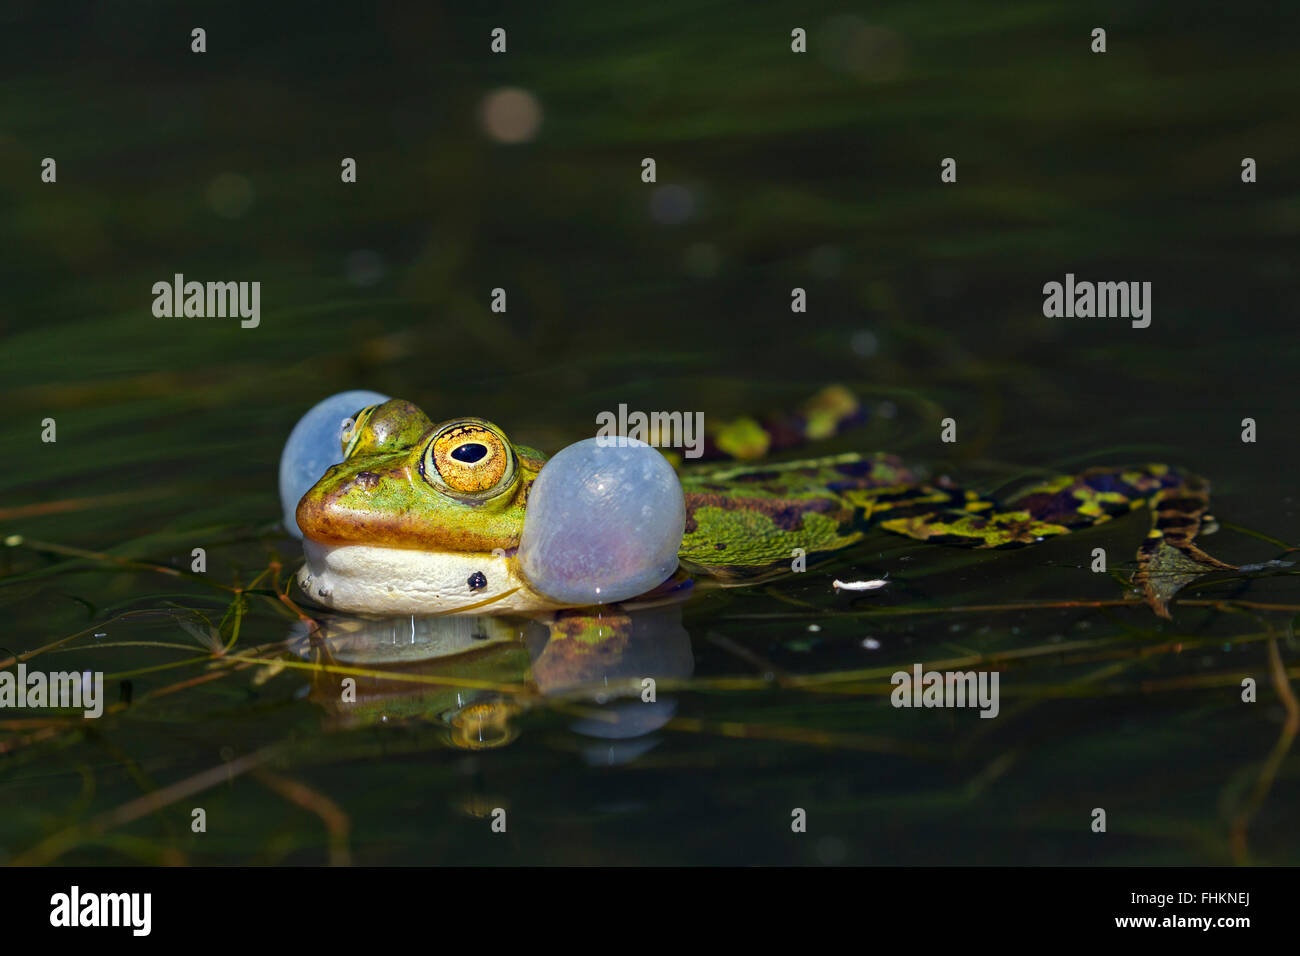 Edible frog / green frog (Pelophylax kl. esculentus / Rana kl. esculenta) male floating in pond showing inflated vocal sacs Stock Photo